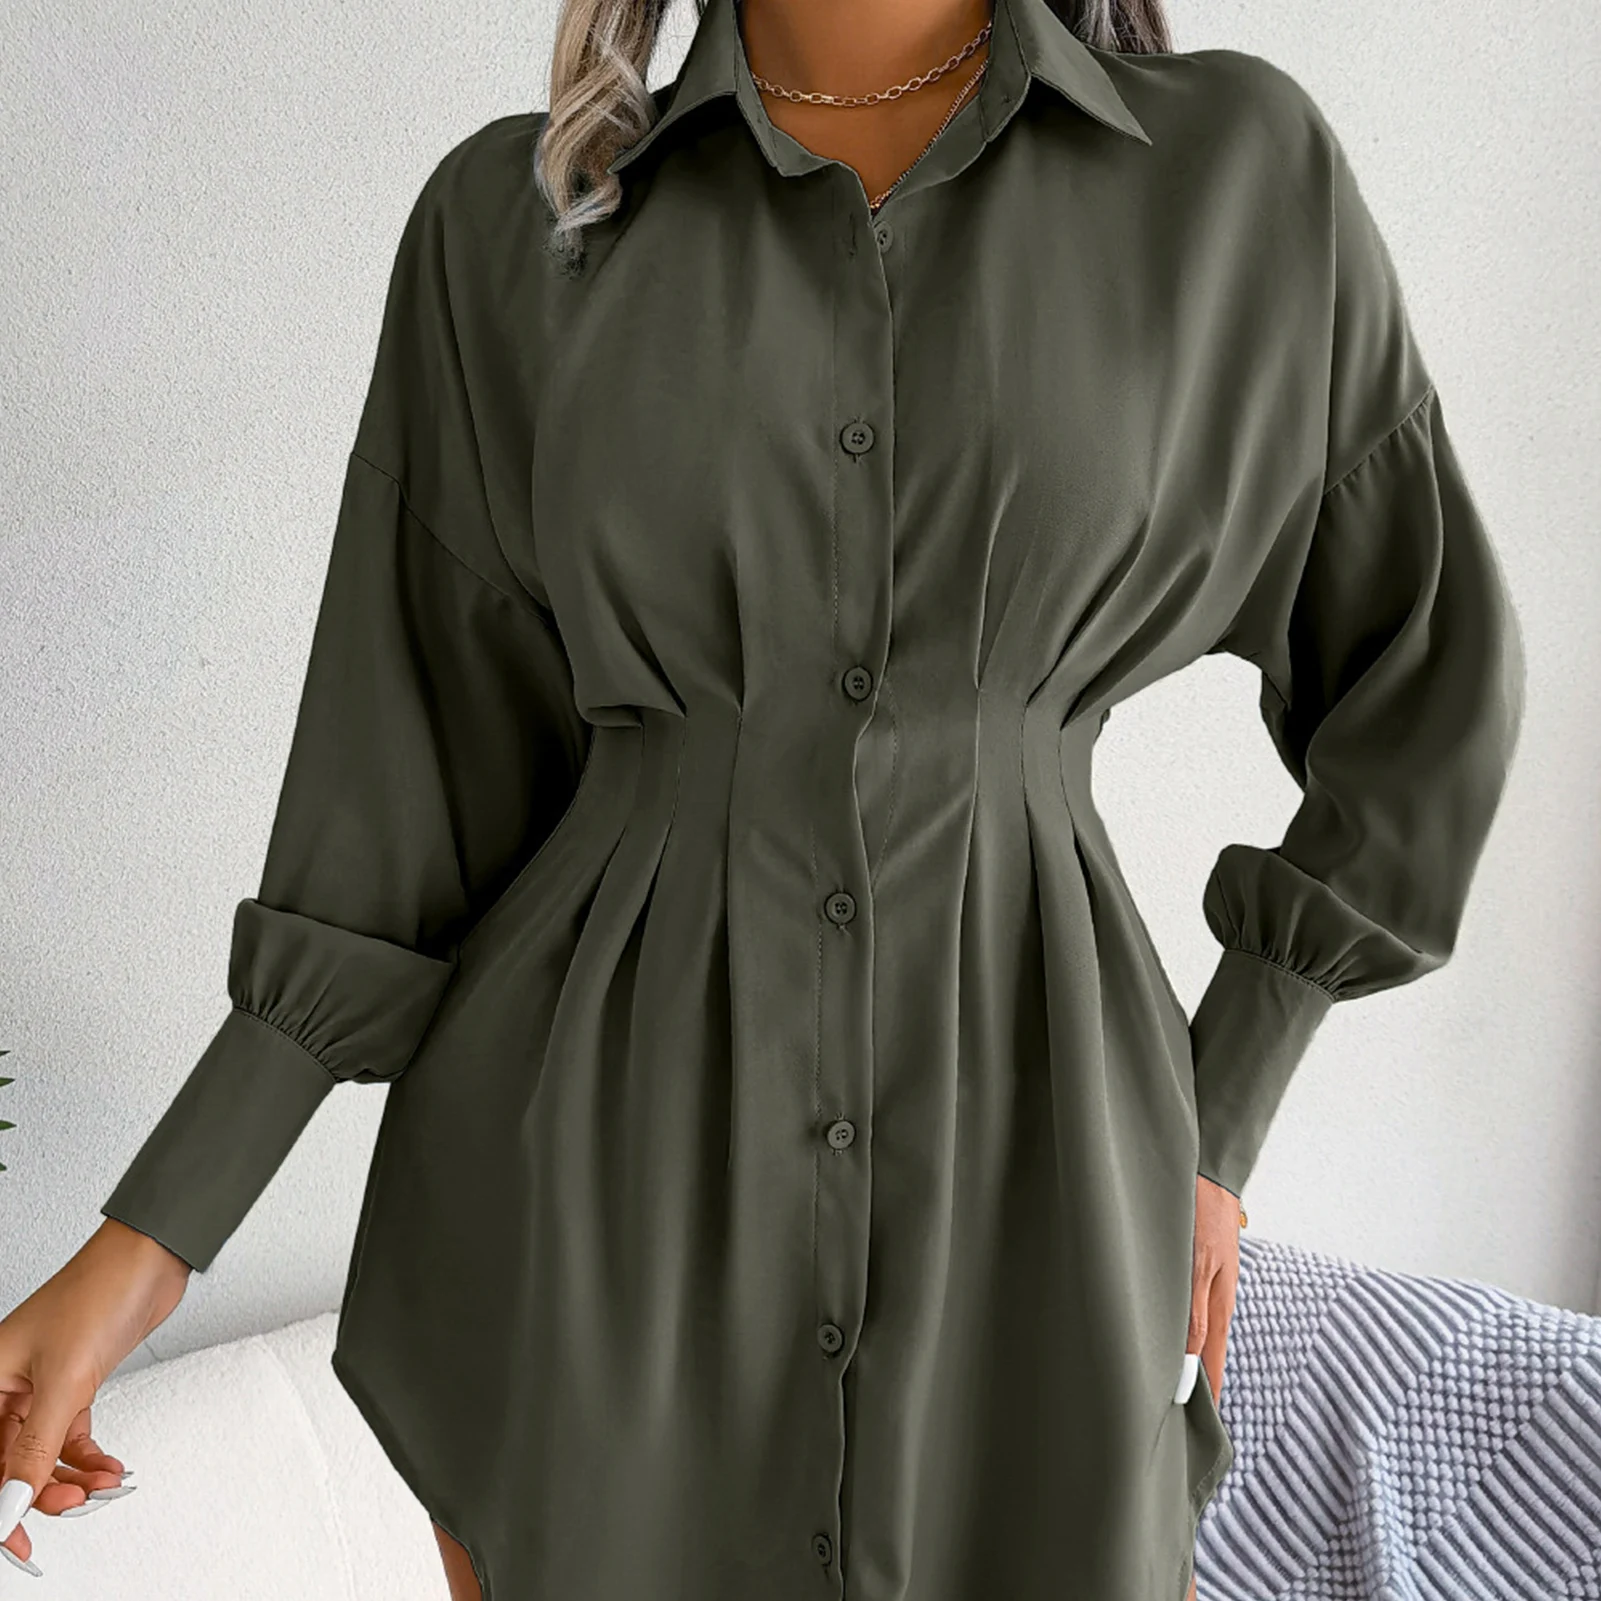 

Summer Buttoned Shirt Dress Lantern Sleeve Plain Shirt Dress Turn-down Collar Simple Solid Color Streetwear for Weekend Vacation